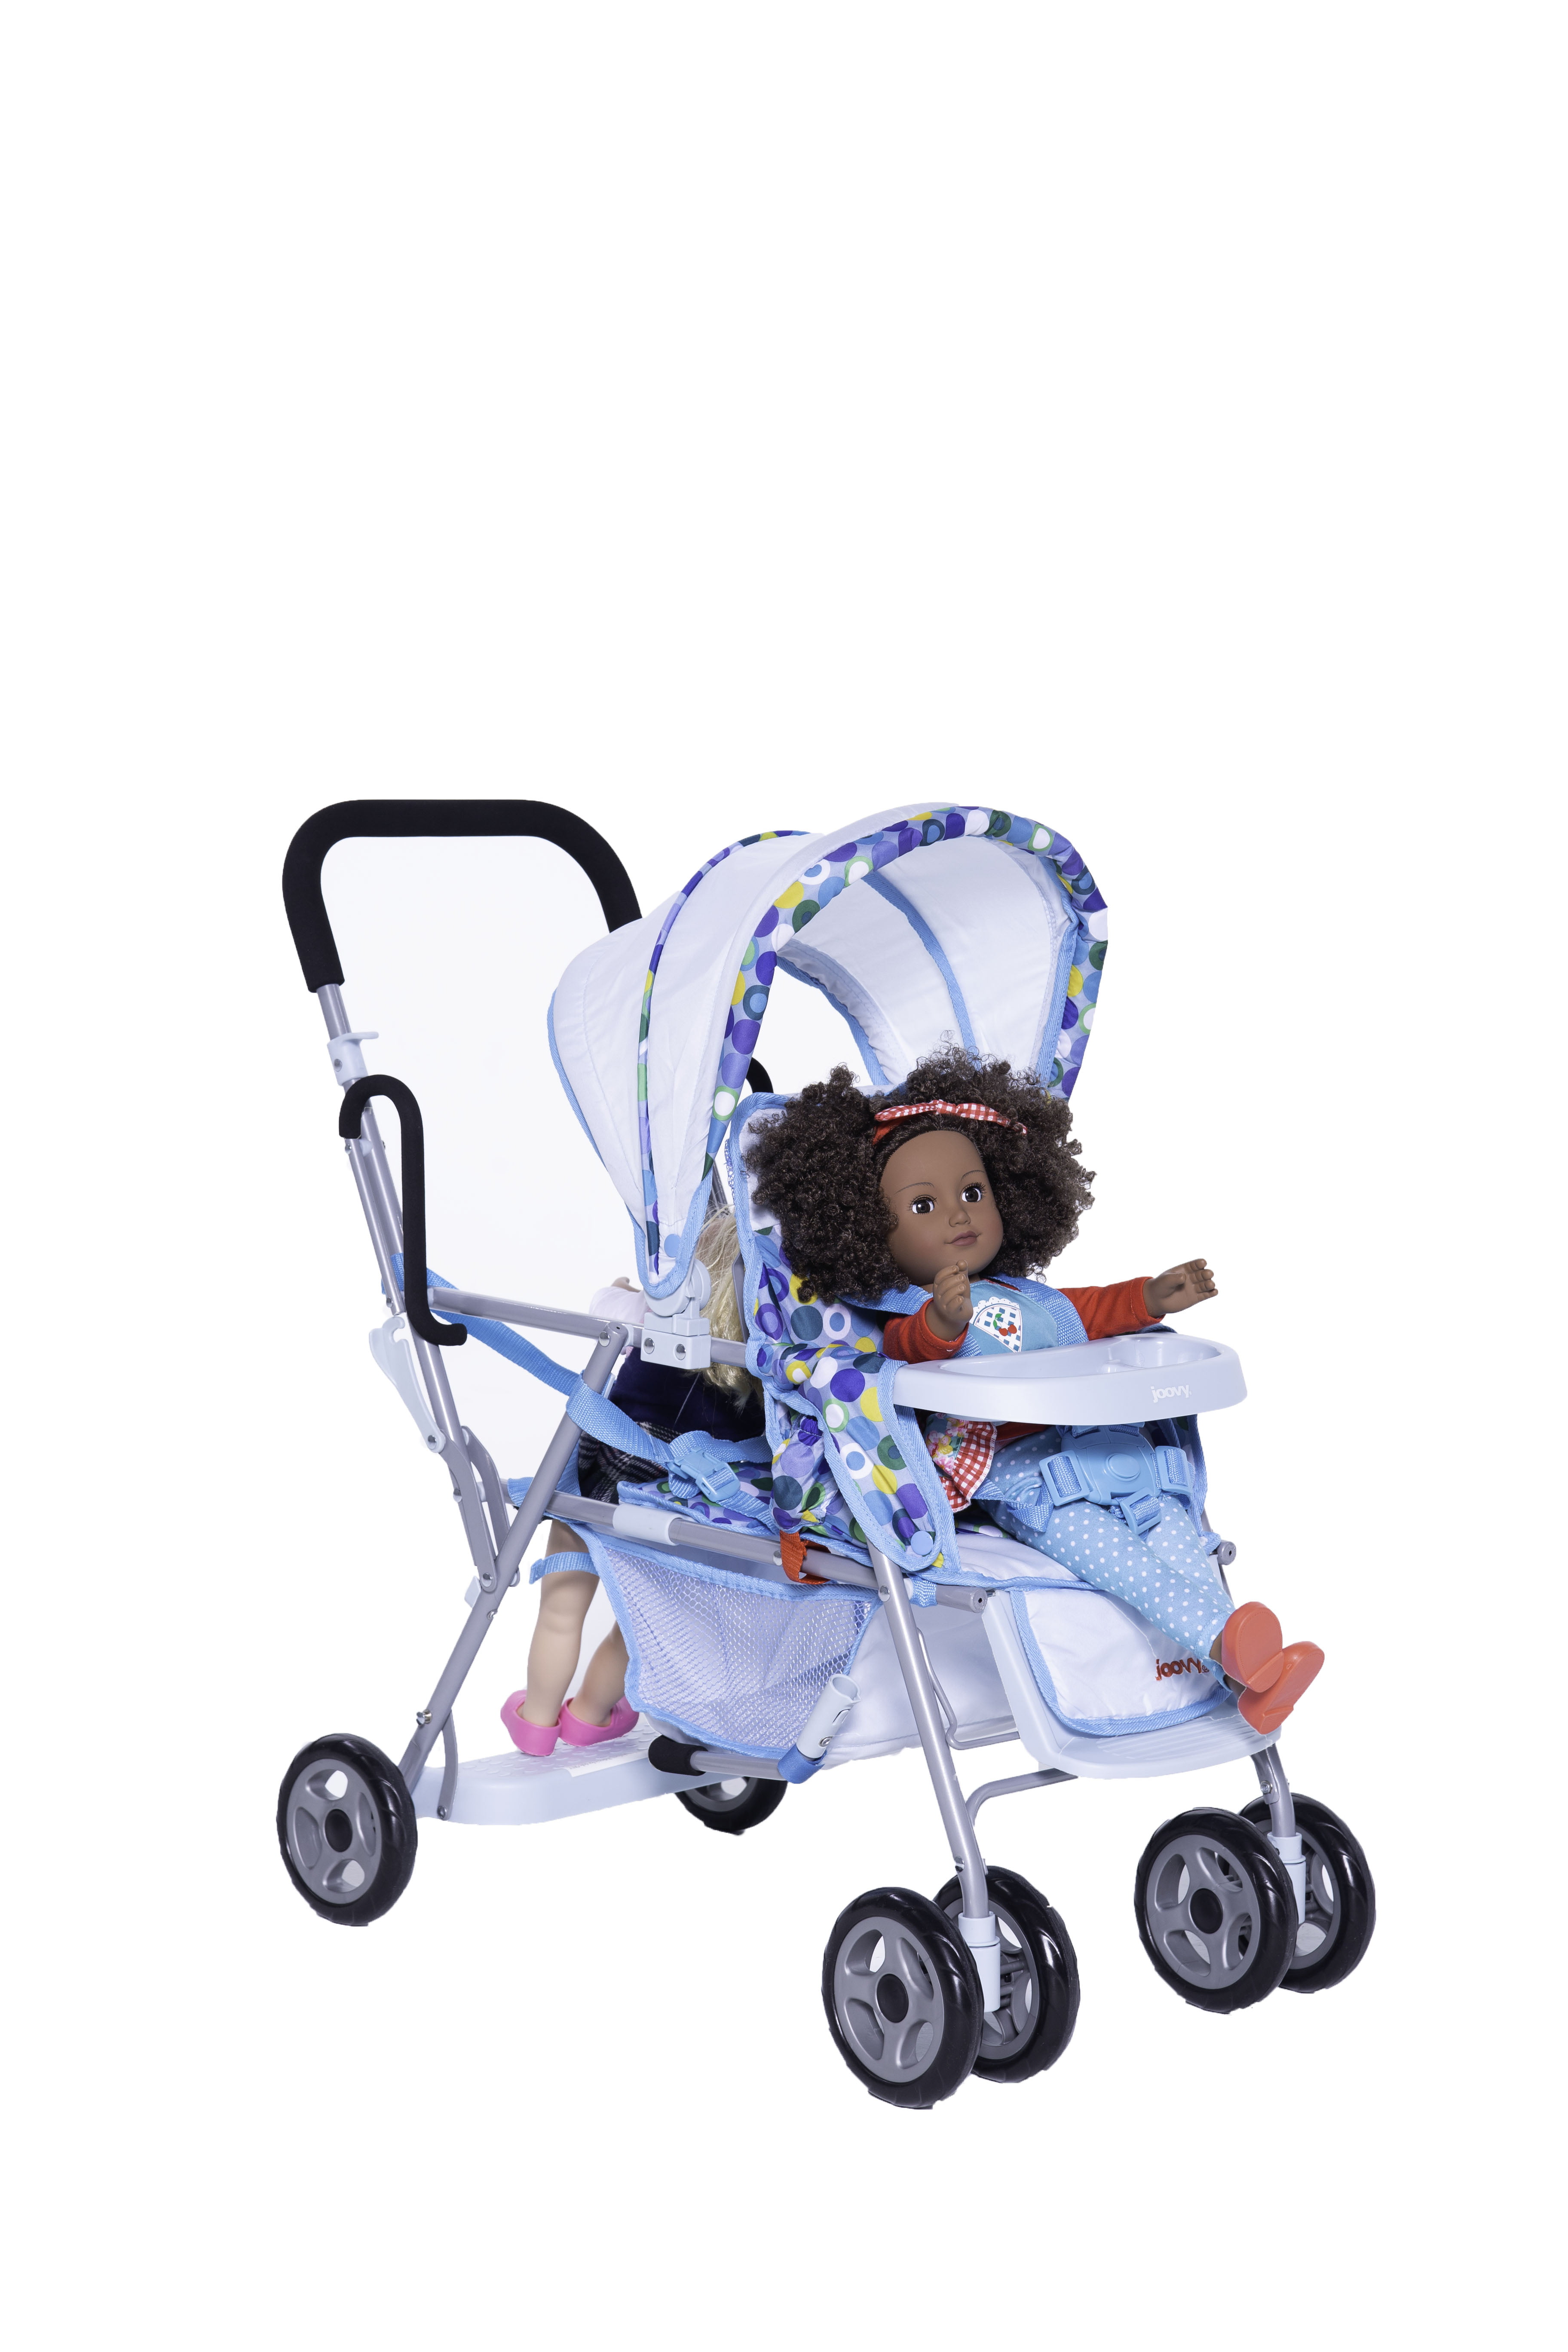 doll stroller for 9 year old